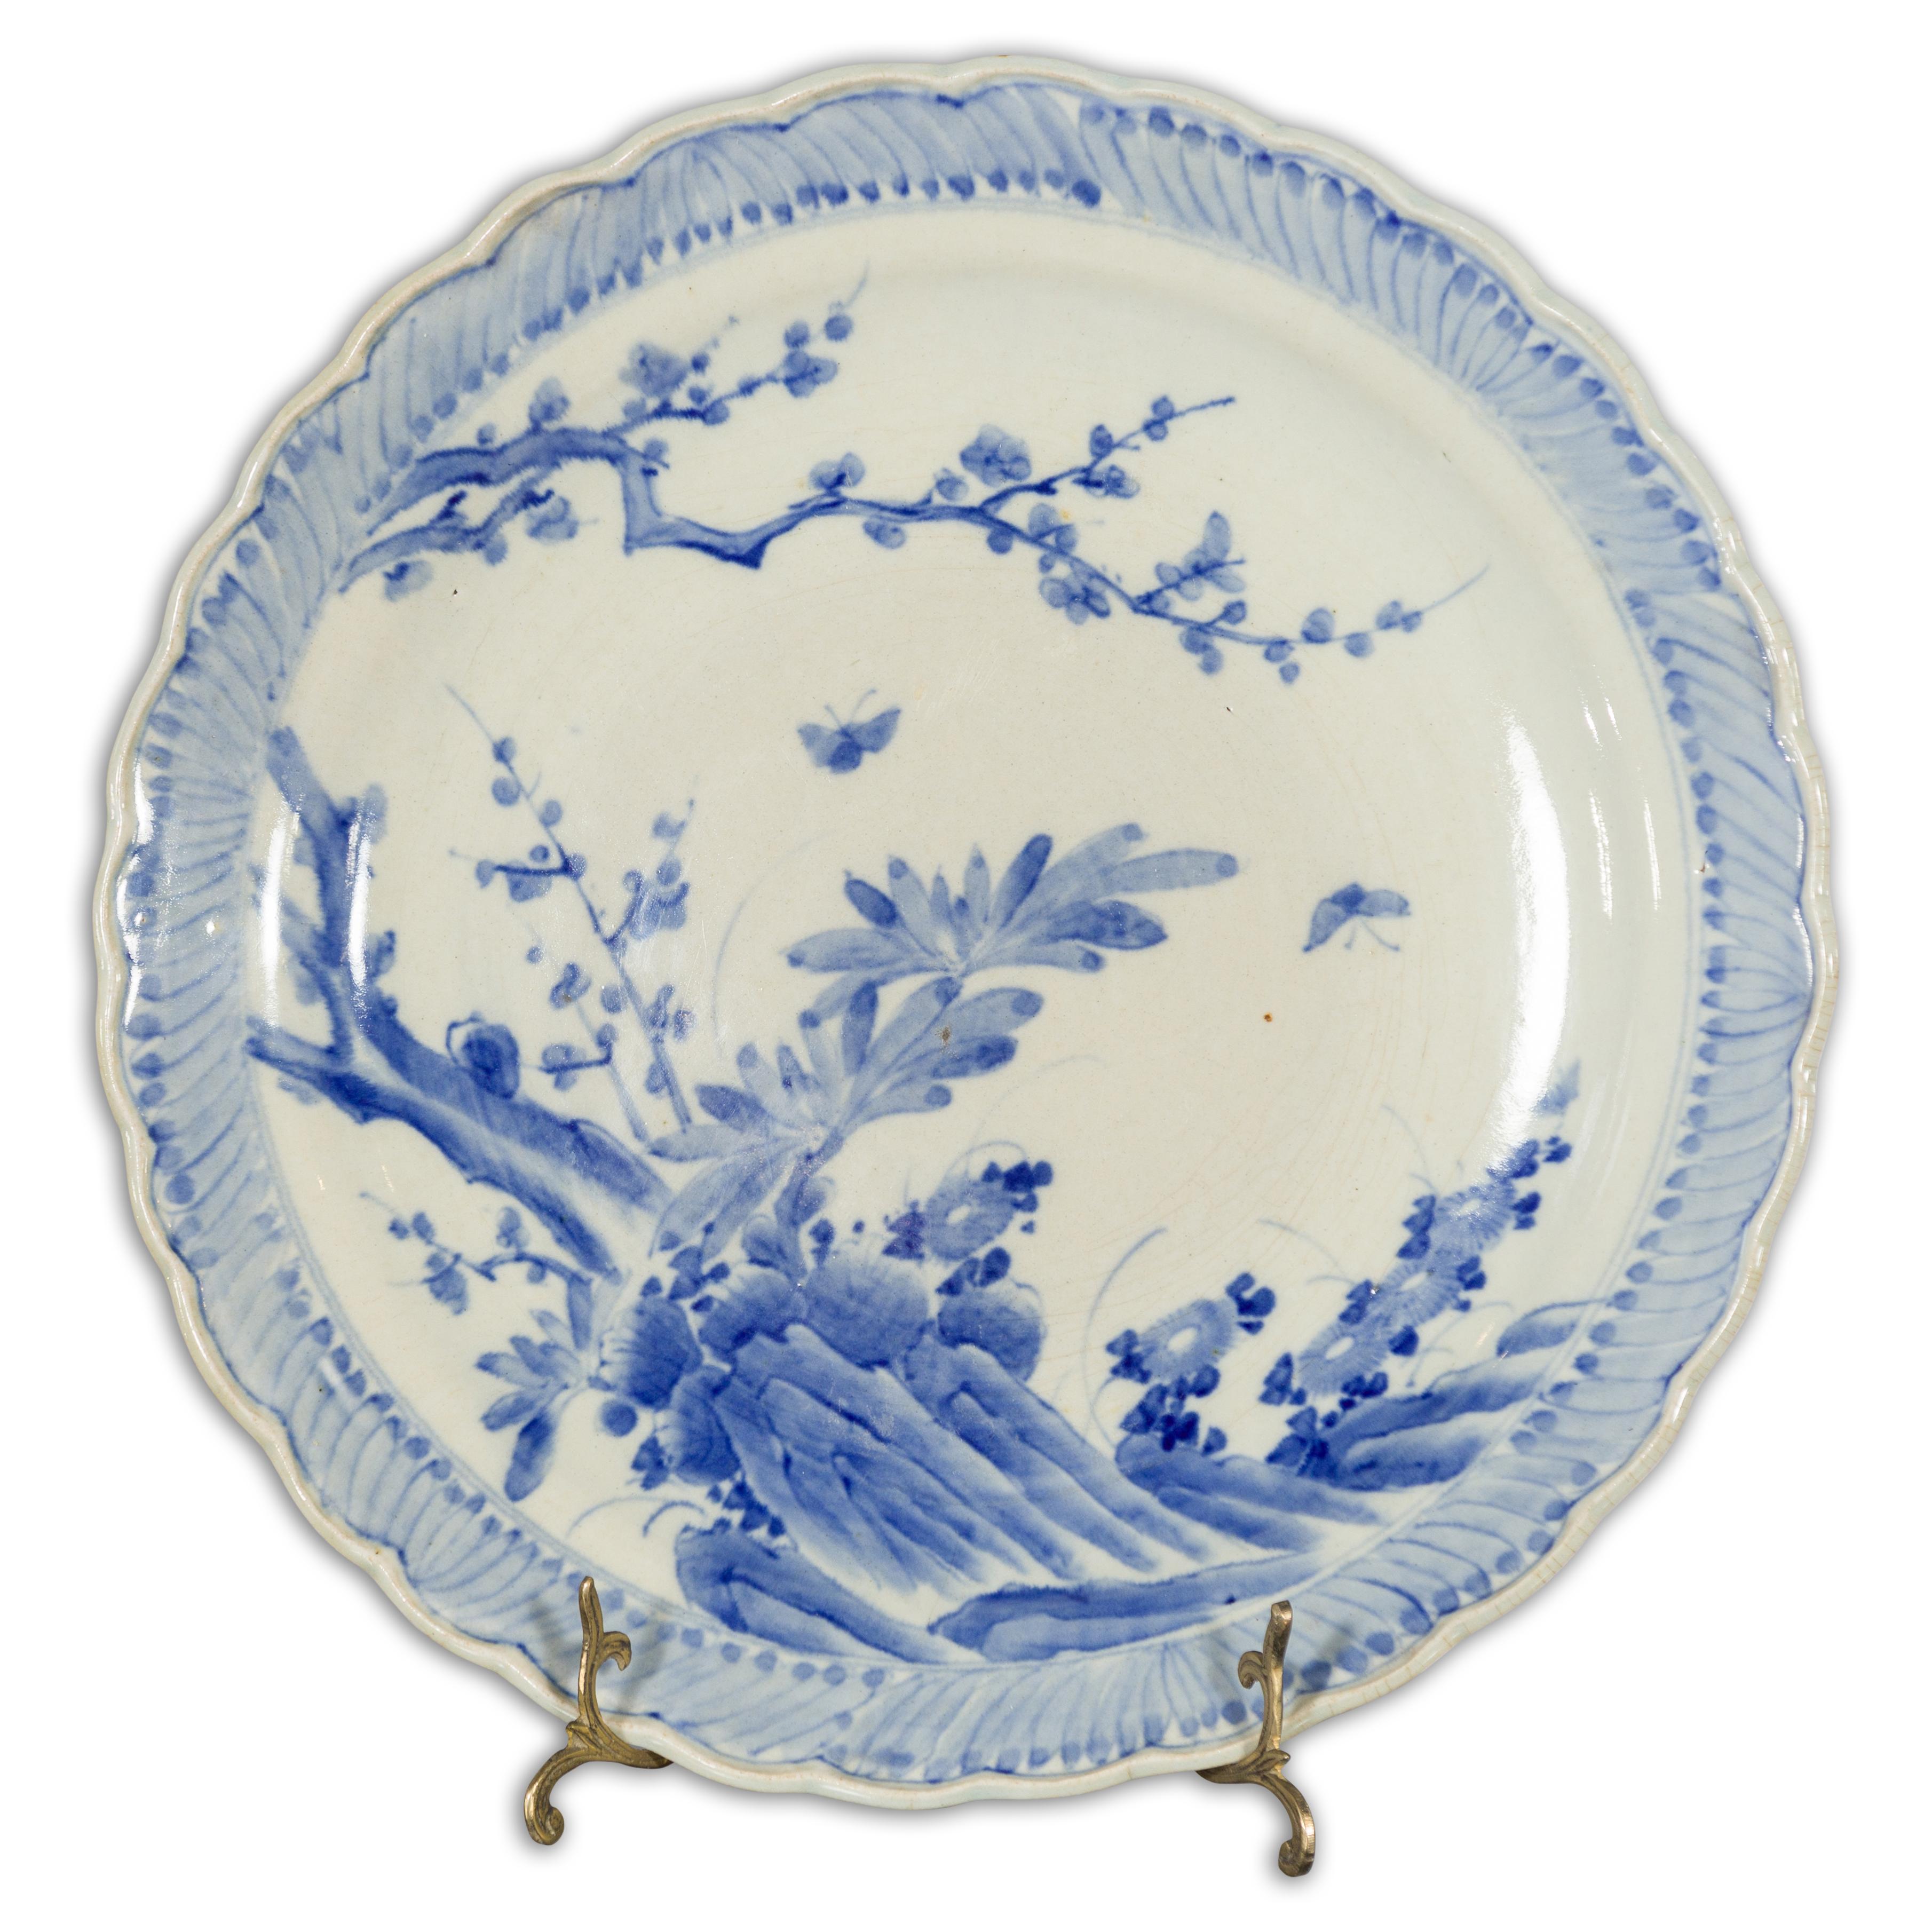 Japanese Hand-Painted Blue and White Porcelain Charger Plate with Foliage Décor For Sale 14